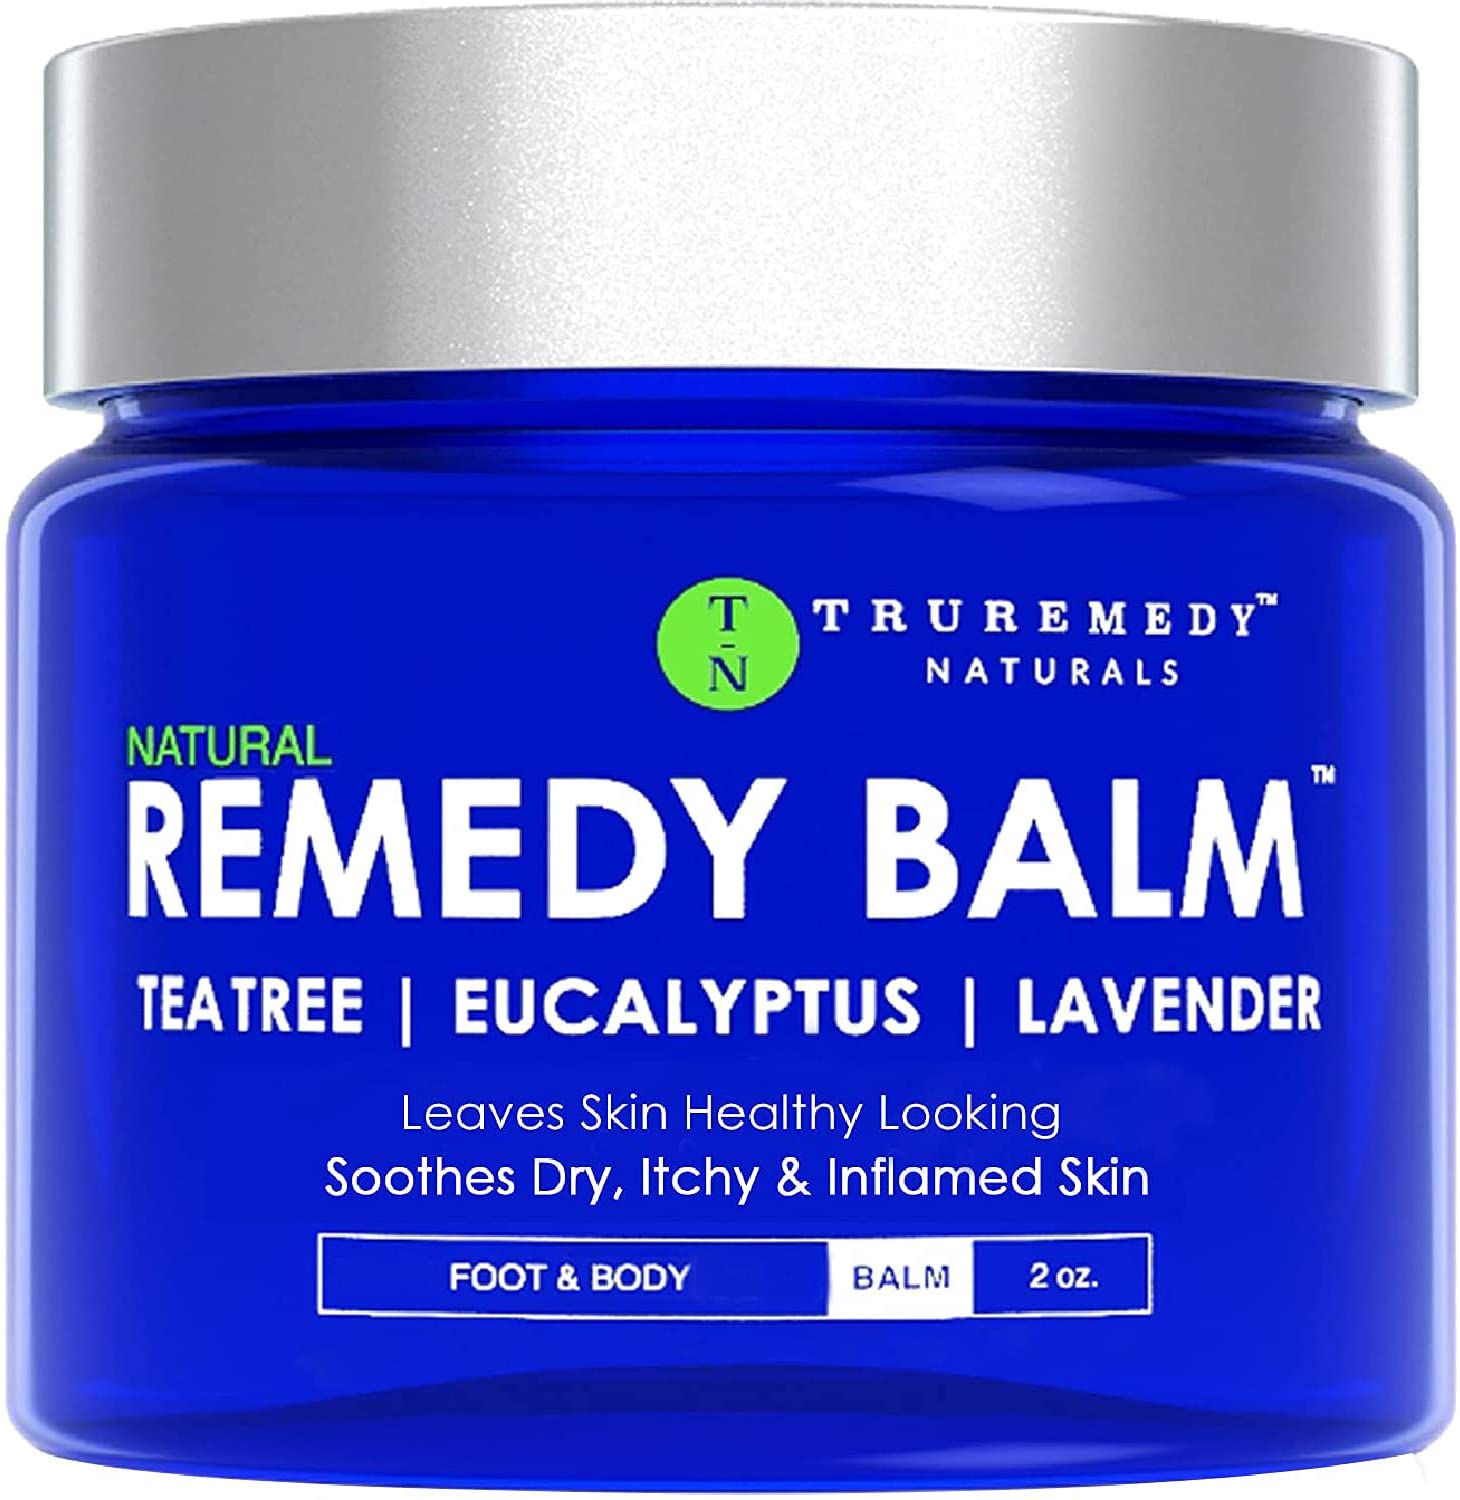 Remedy Tea Tree Oil Balm - Cream for Athletes Foot, Jock Itch, Ringworm, Eczema, Nail Issues, Rash, Skin Irritation - Ointment for Dry, Itchy Skin-2 Oz (56g)